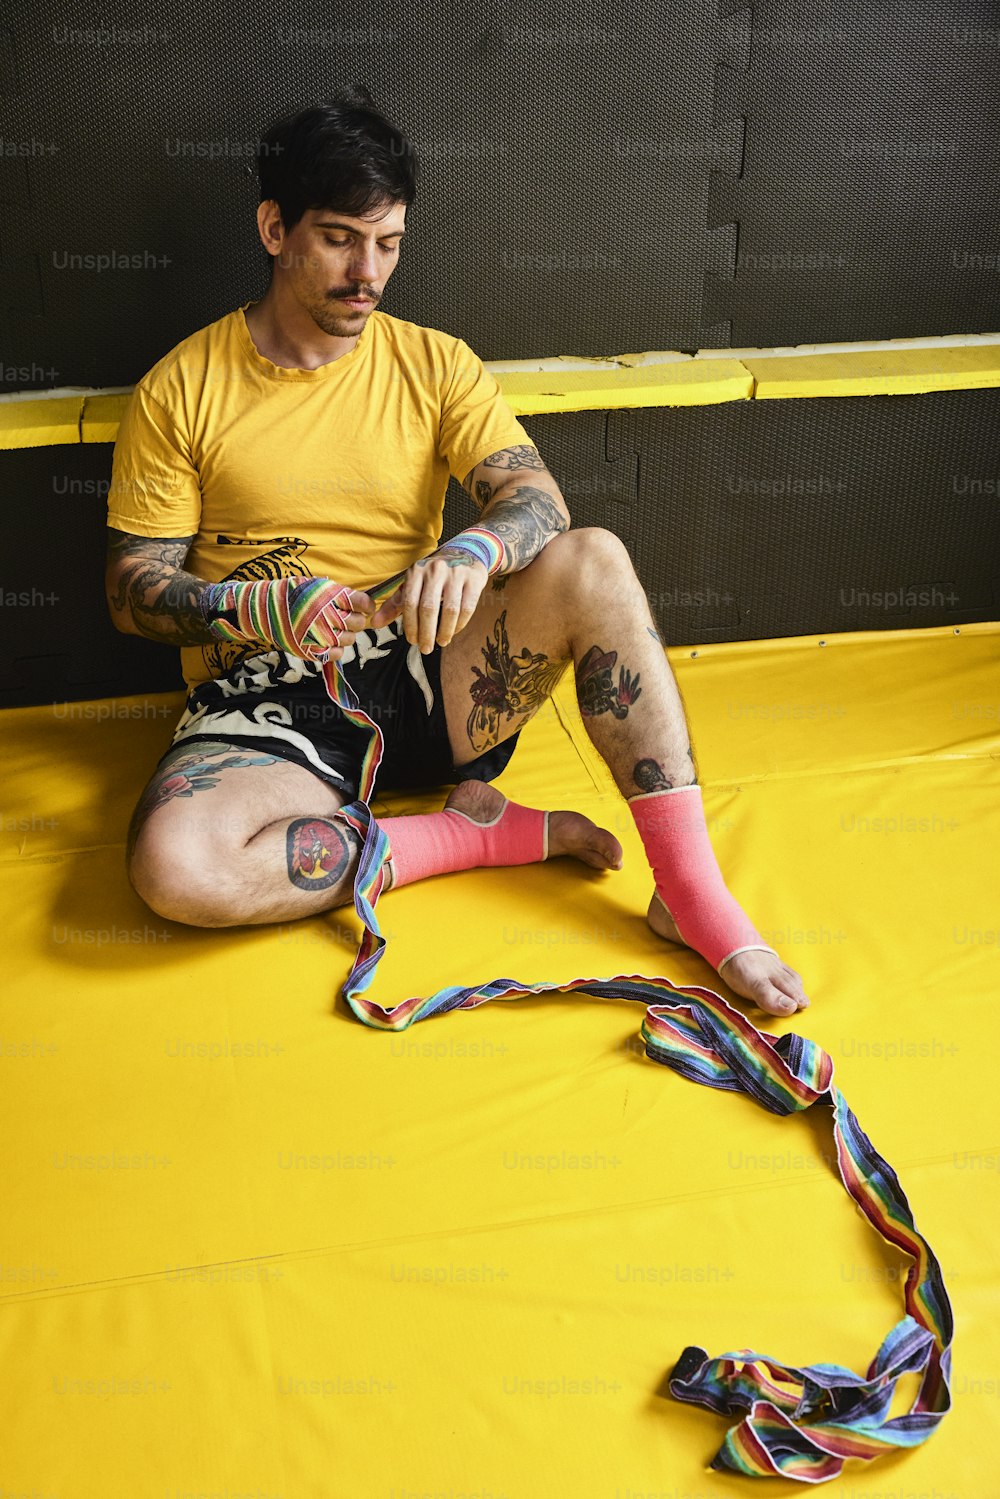 a man sitting on the ground with a pair of colorful socks